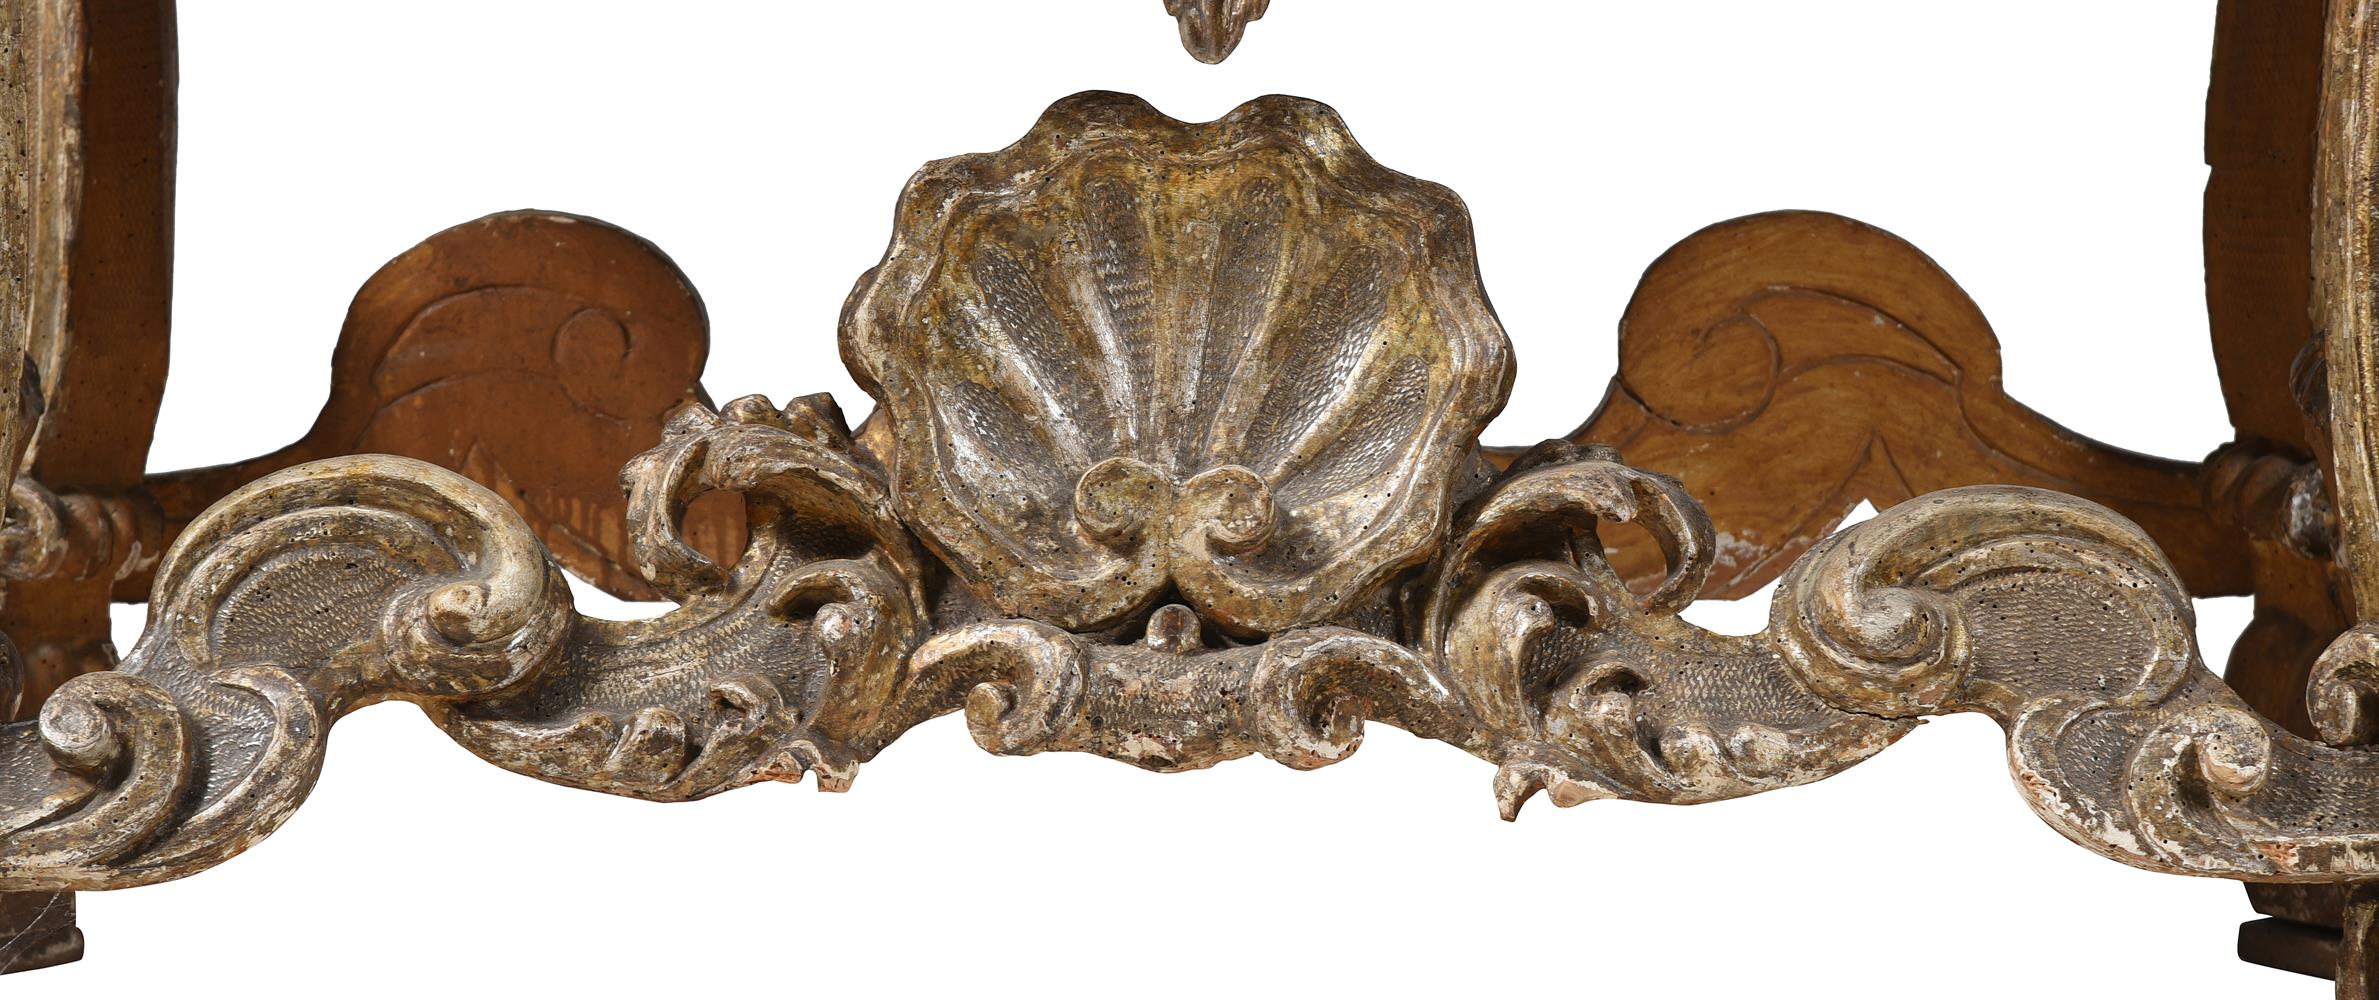 A CARVED GILTWOOD AND LUMACHELLA MARBLE CONSOLE TABLE, ITALIAN, FIRST HALF 18TH CENTURY - Image 5 of 6